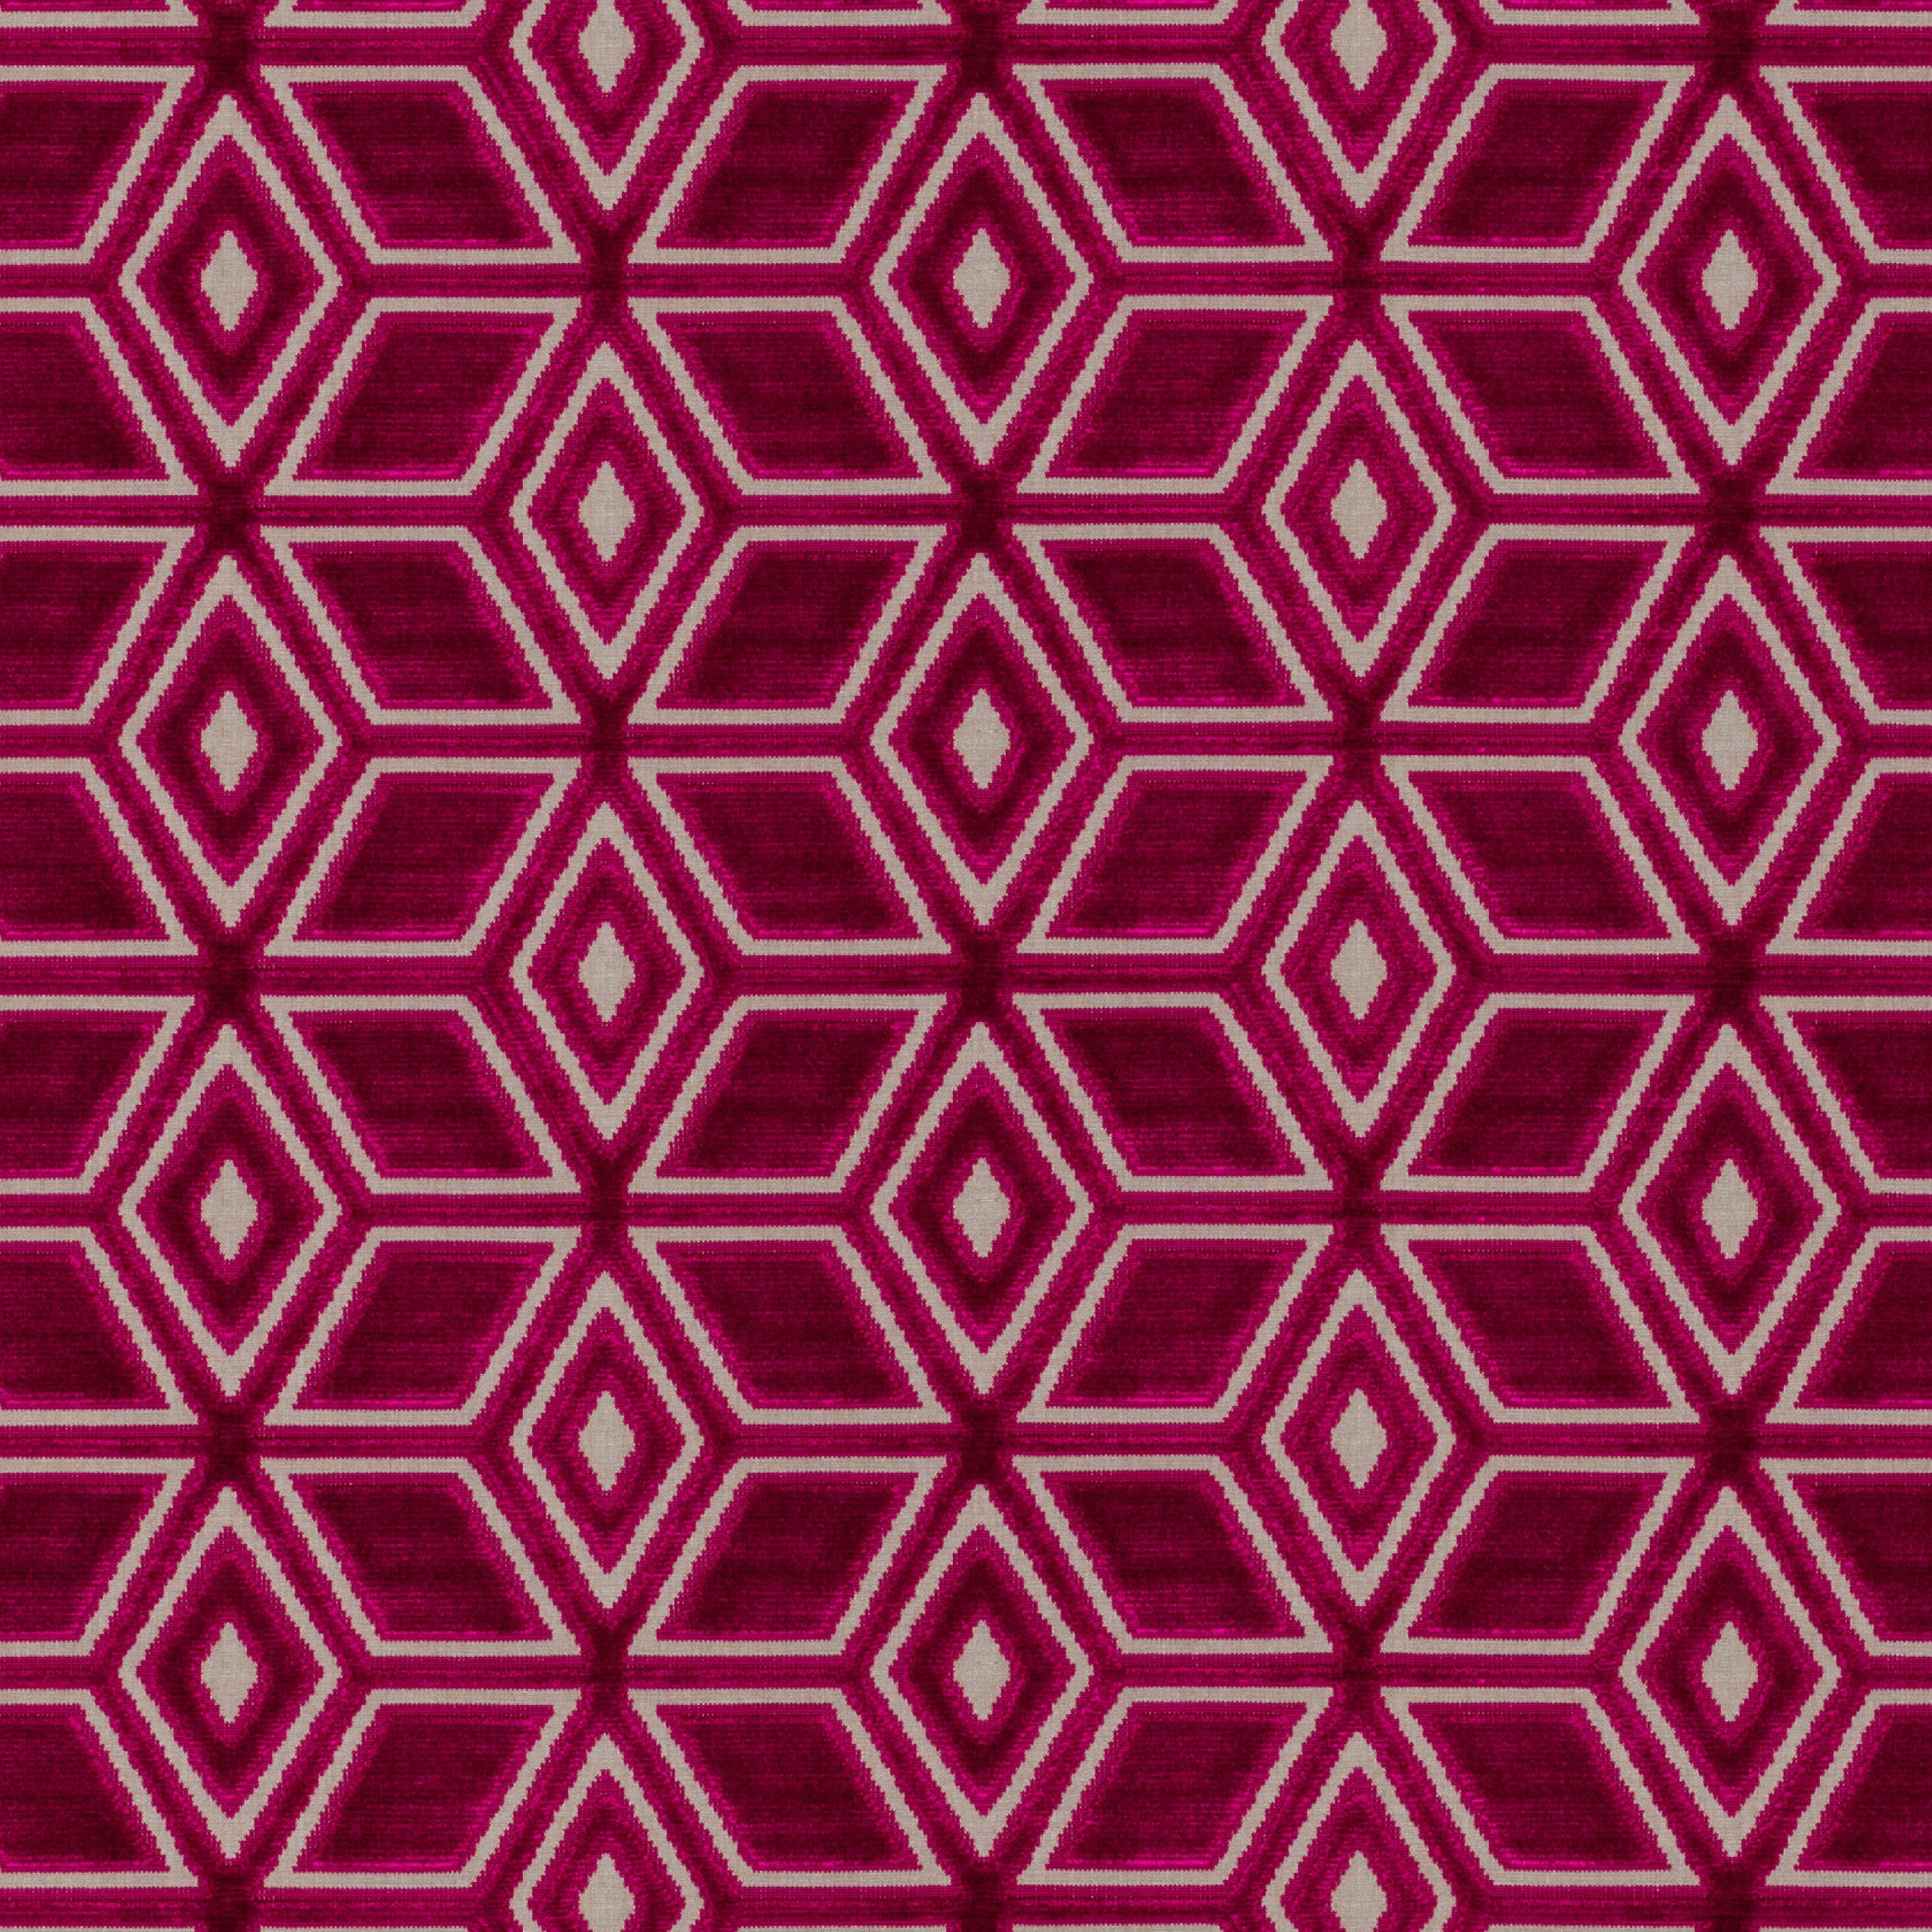 Jardin Maze fabric in fuchsia color - pattern number AW72984 - by Anna French in the Manor collection